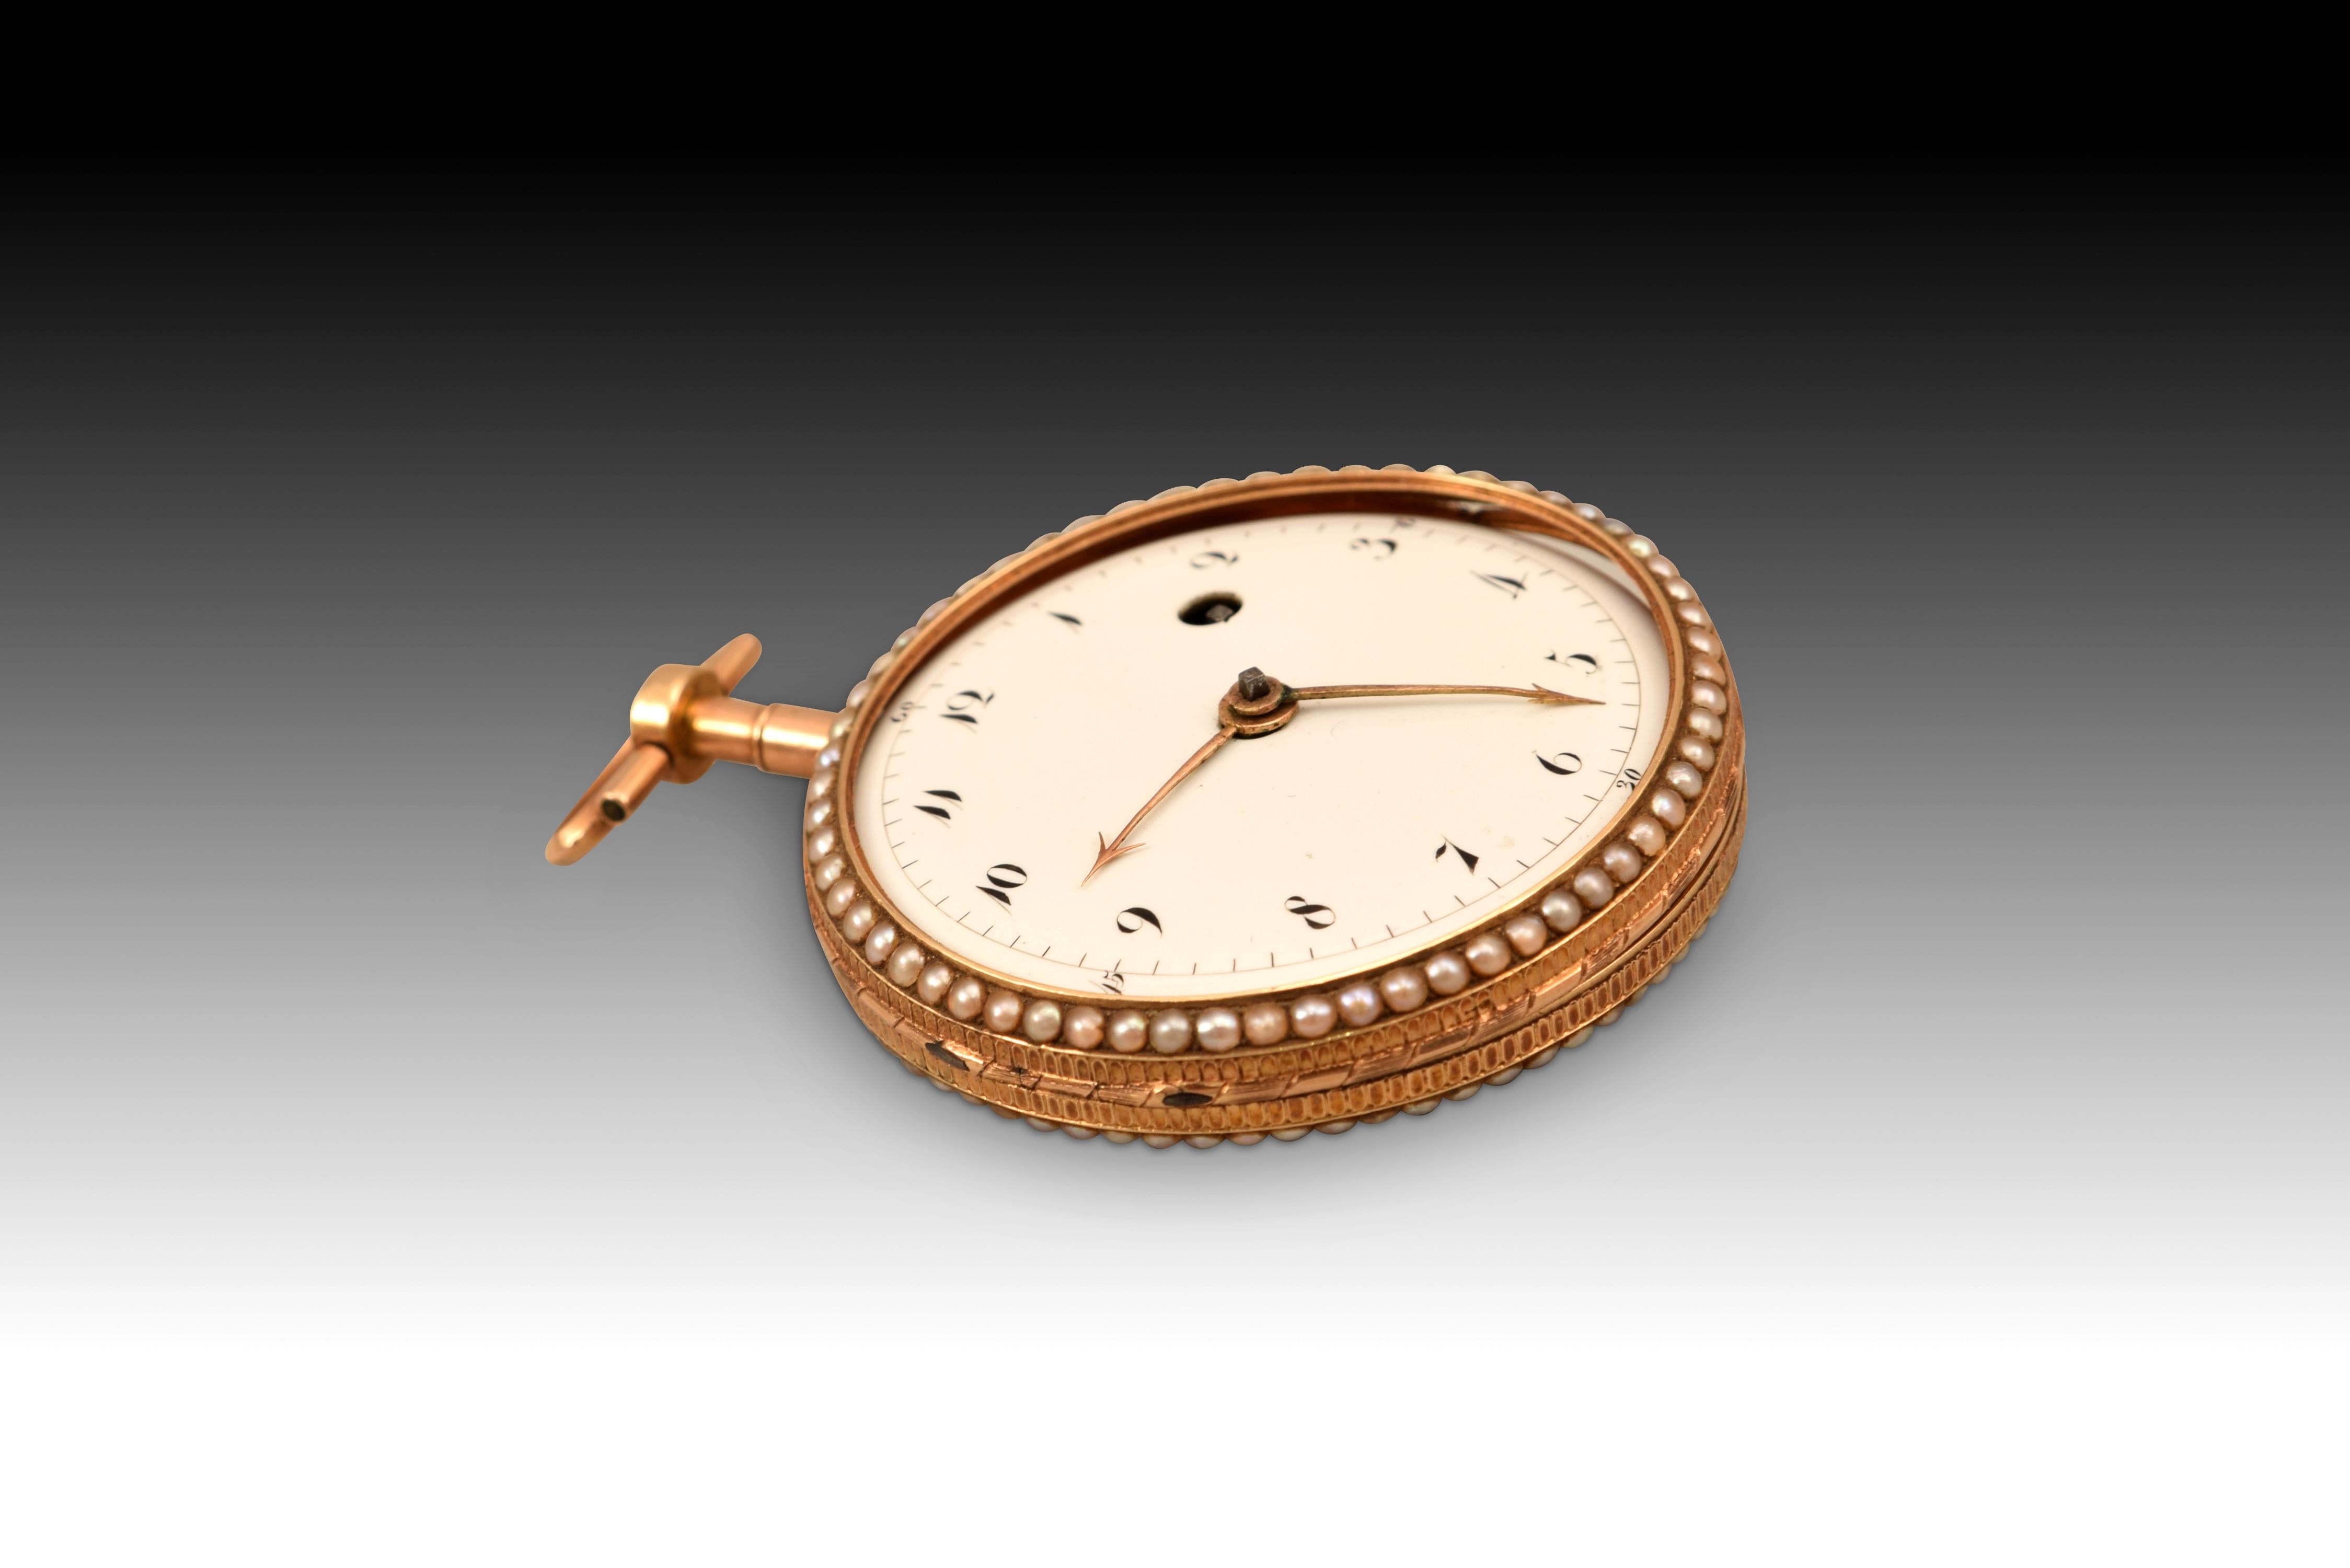 Metal Pocket Watch, Jaqs Blanc, Gold, Enamel, Etc. Possibly ca Late 18th C For Sale